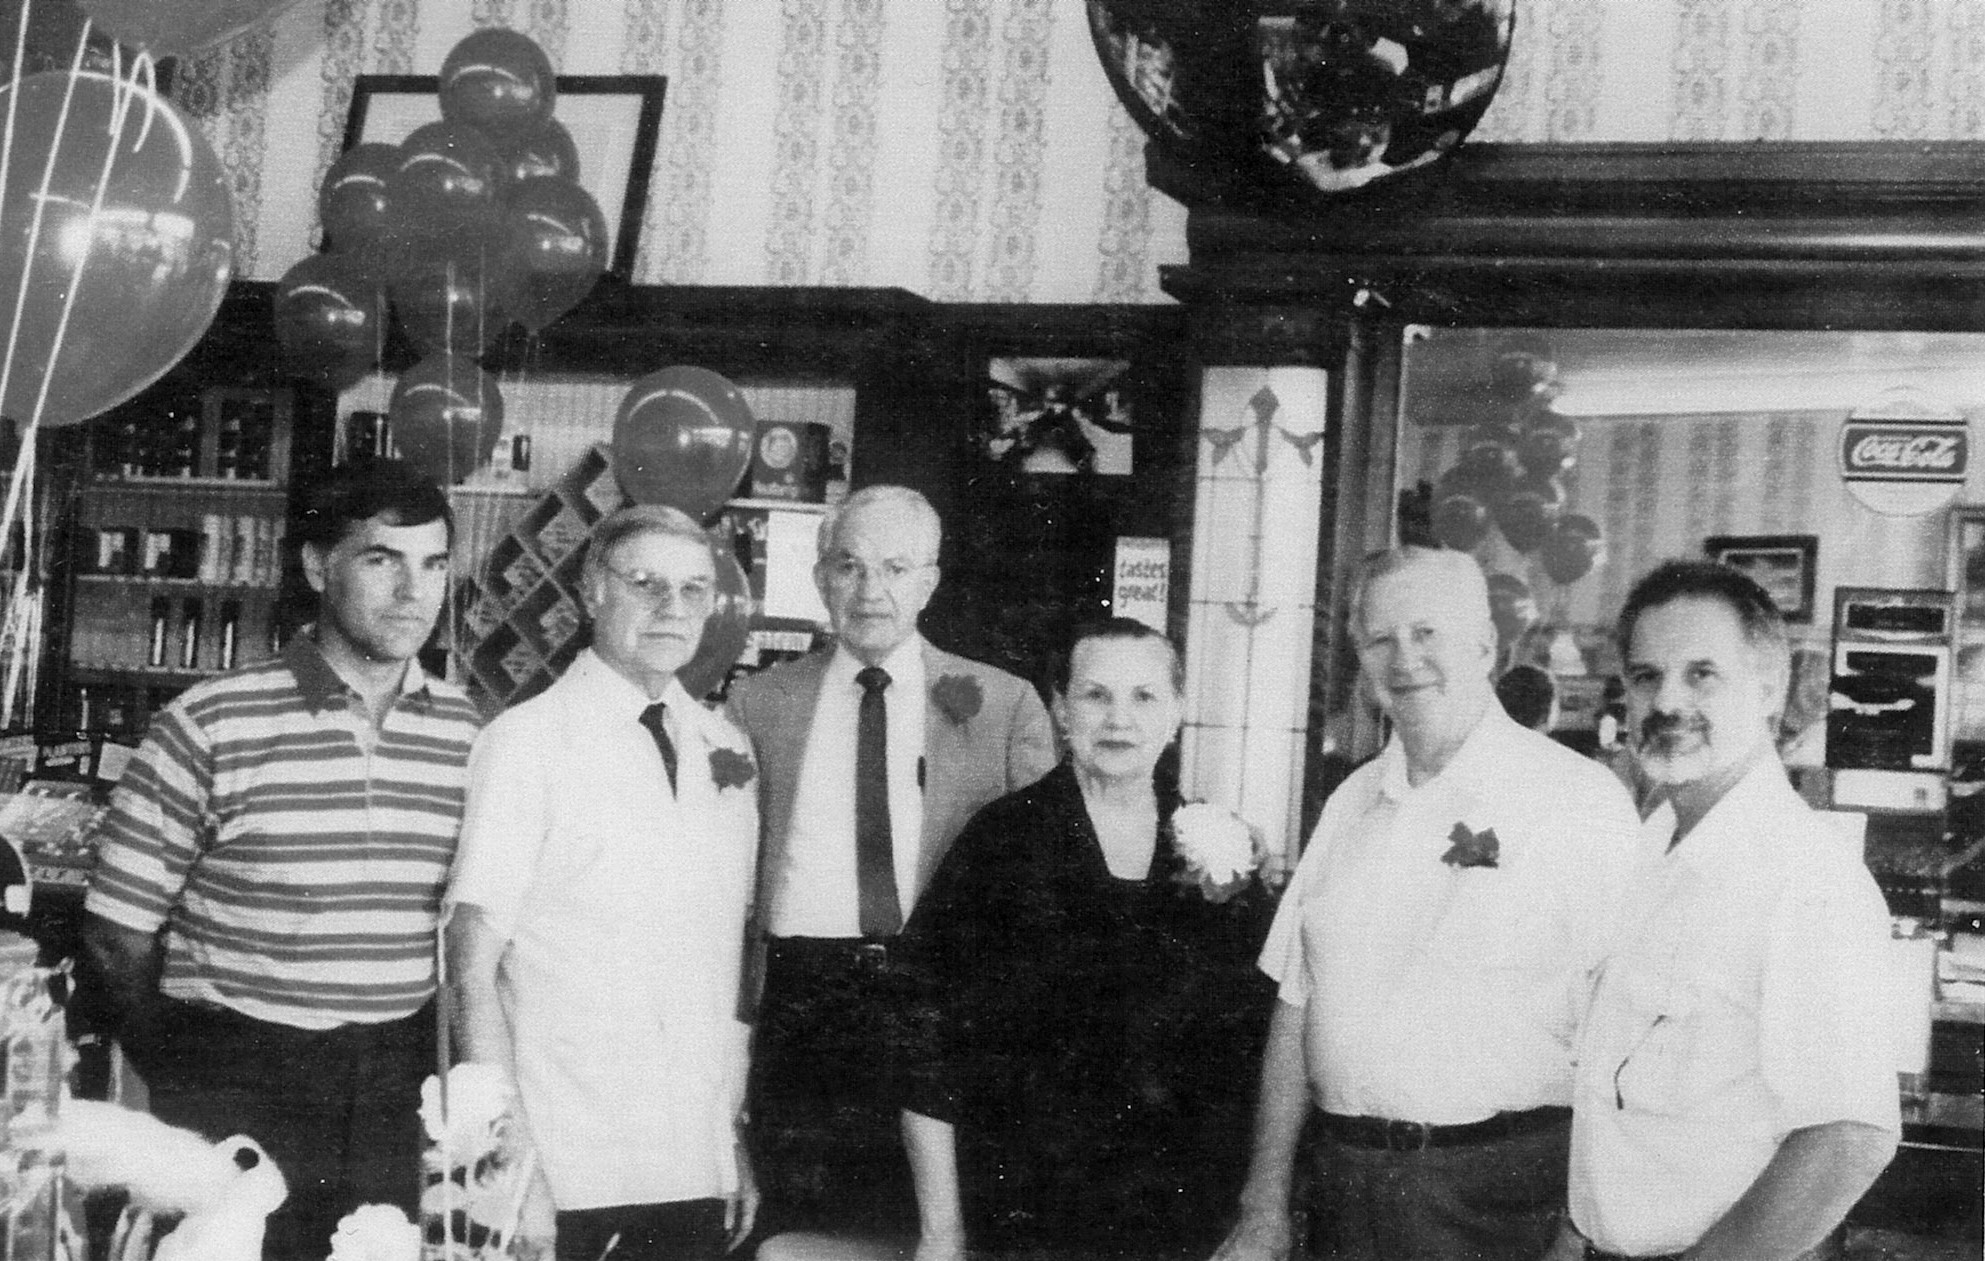 Watson family members in the Dixie Drug store